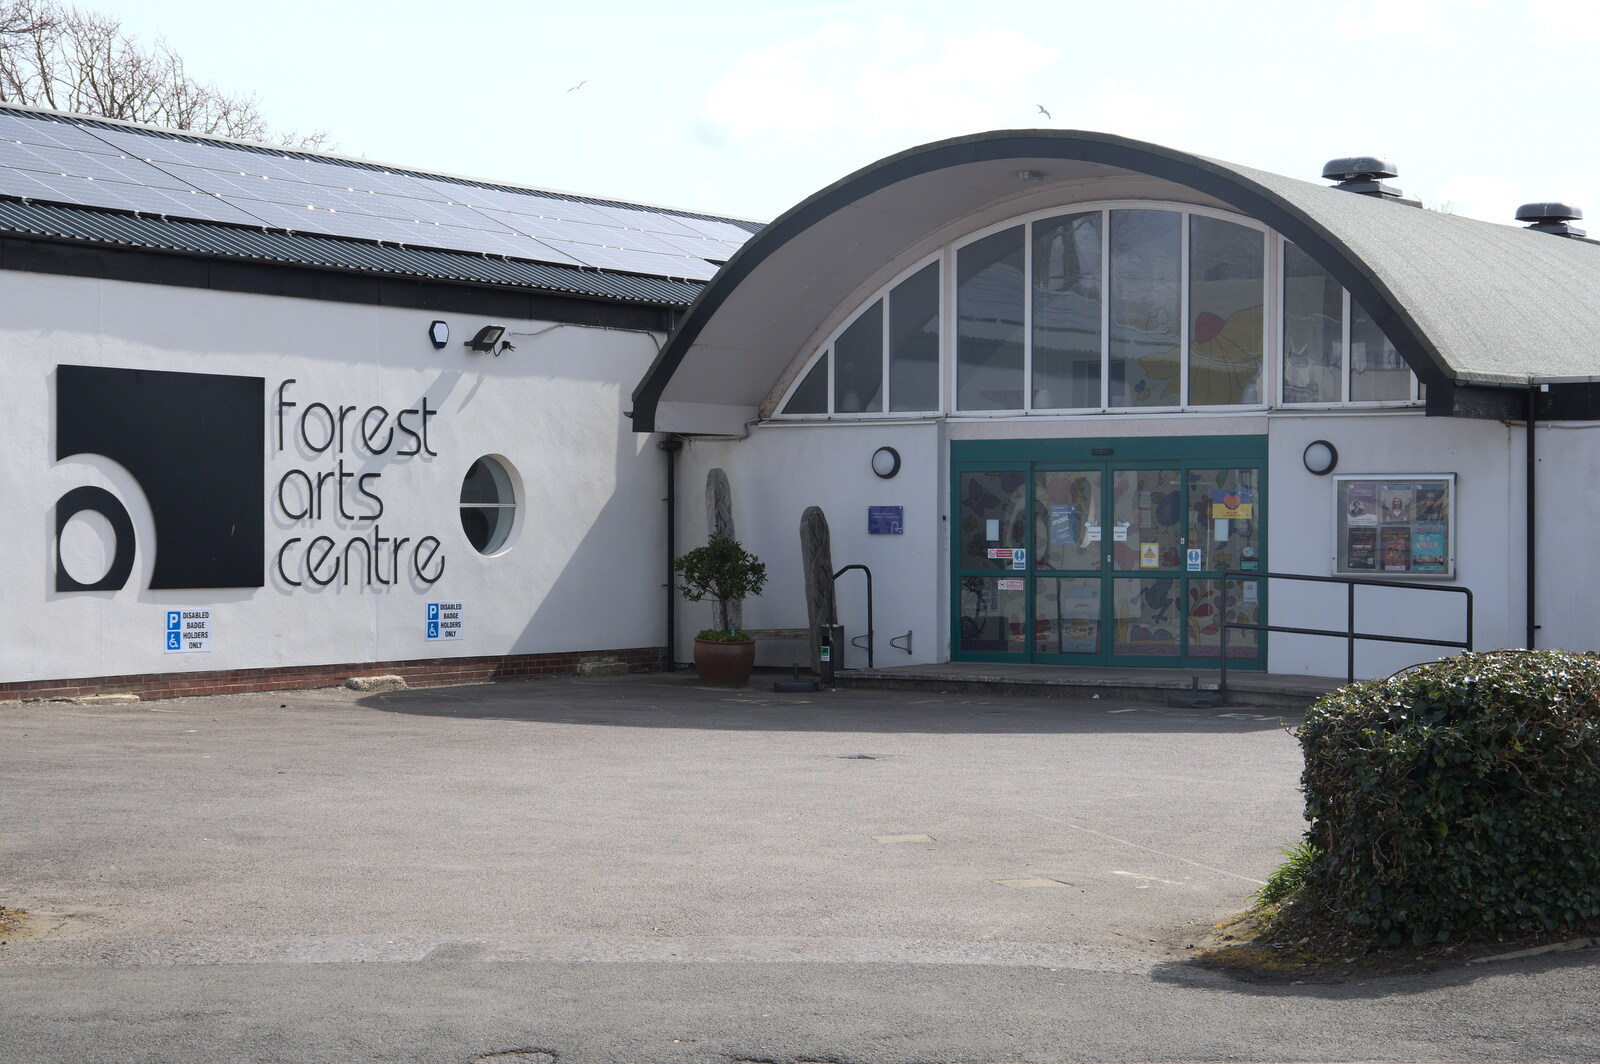 Bernice's Birthday and Walks Around New Milton and Lymington, Hampshire - 10th April 2022: The Forest Arts Centre, once an AJO venue